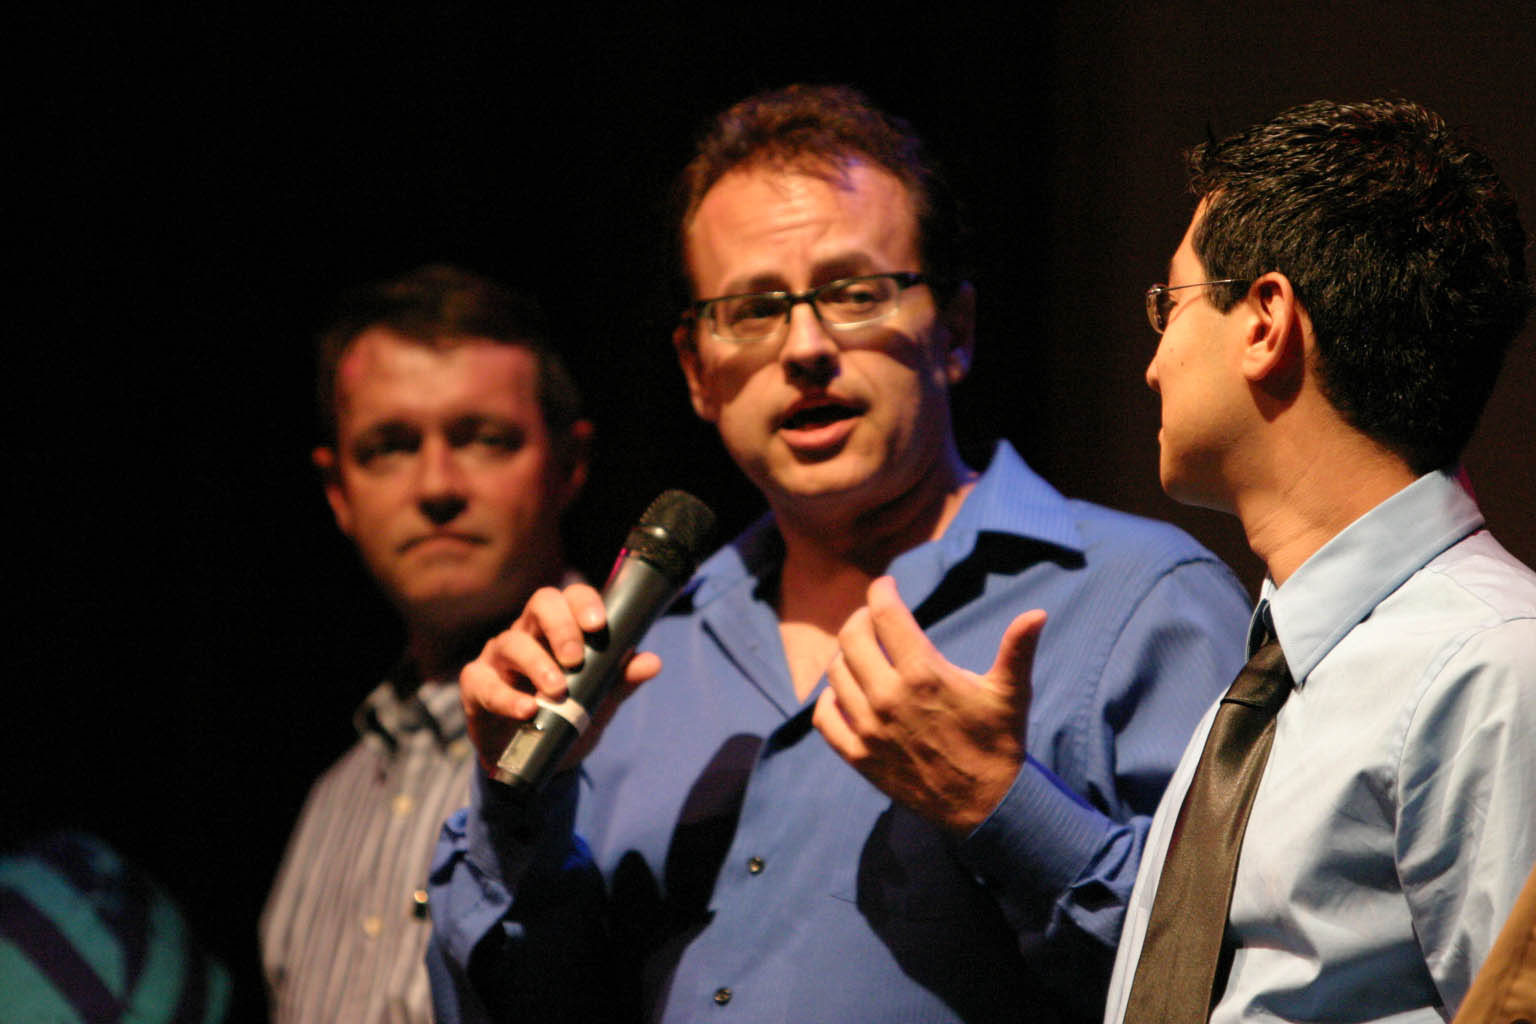 Steve Gelder onstage with director Donlee Brussel at the 2009 Valley Film Festival, where their film with Glynn Beard, Cabbie, won Best Comedy Short.